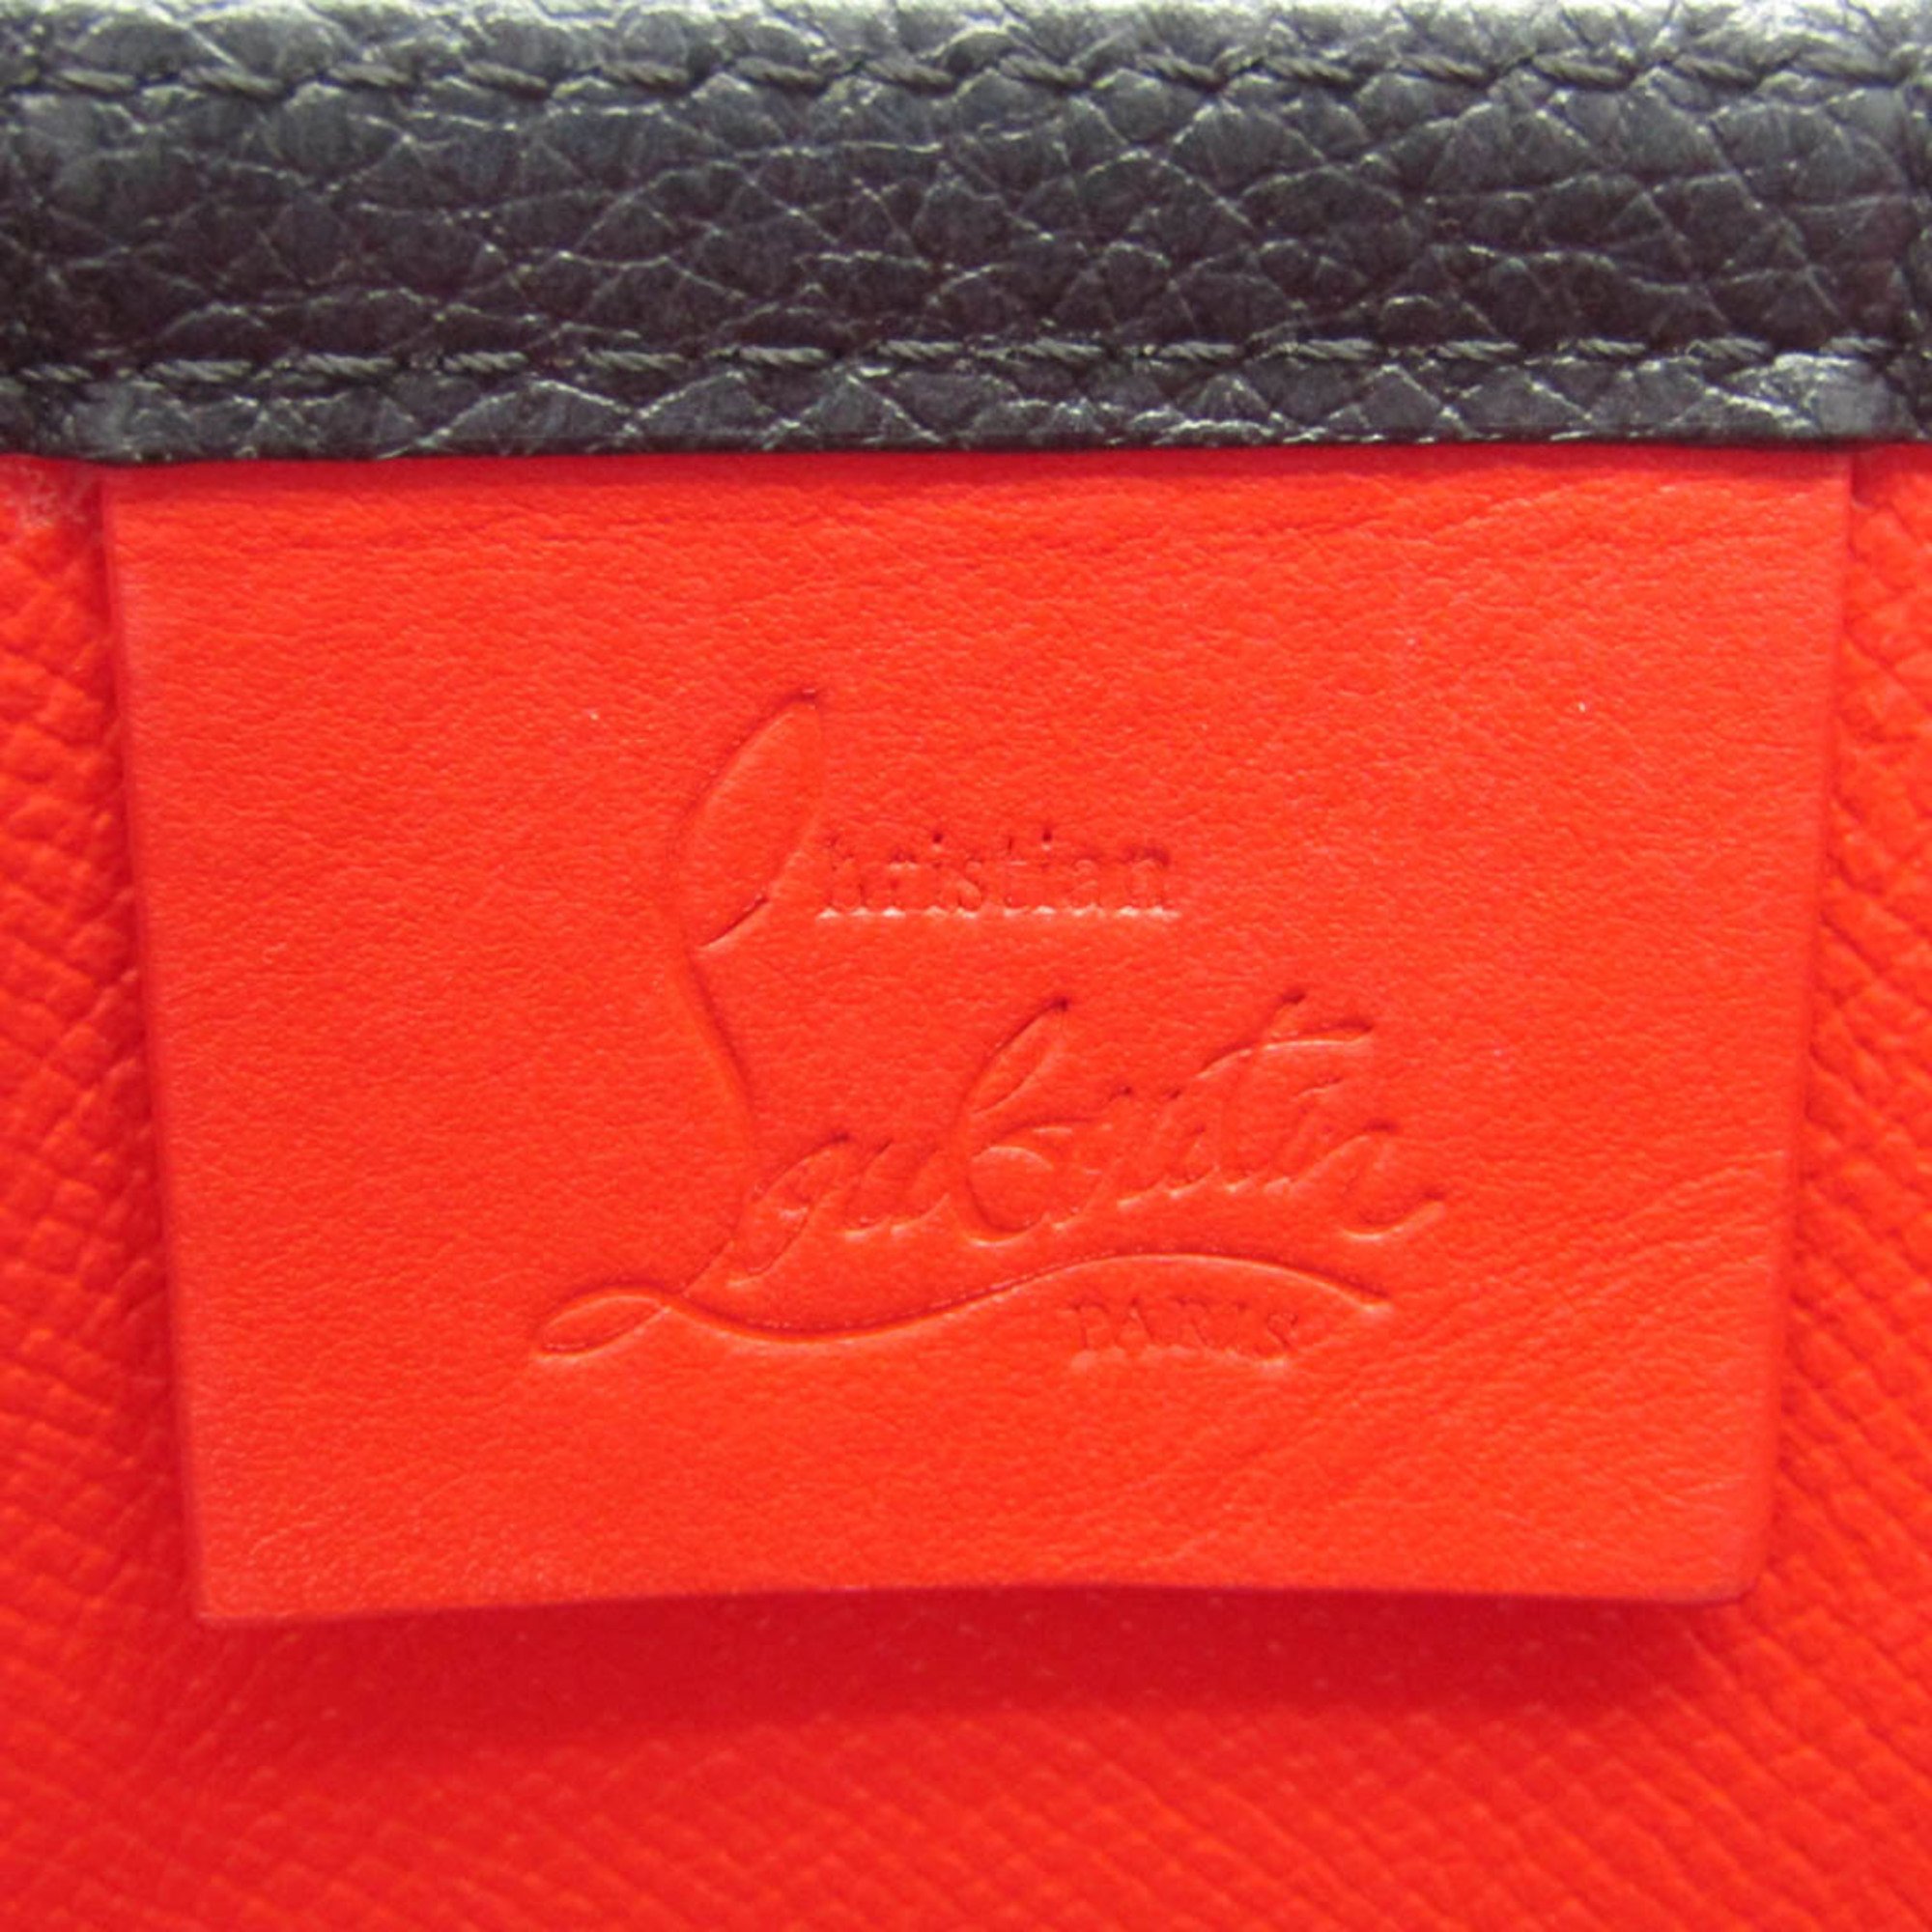 Christian Louboutin Cabata Men,Women Leather,Rubber Tote Bag Black,Red Color